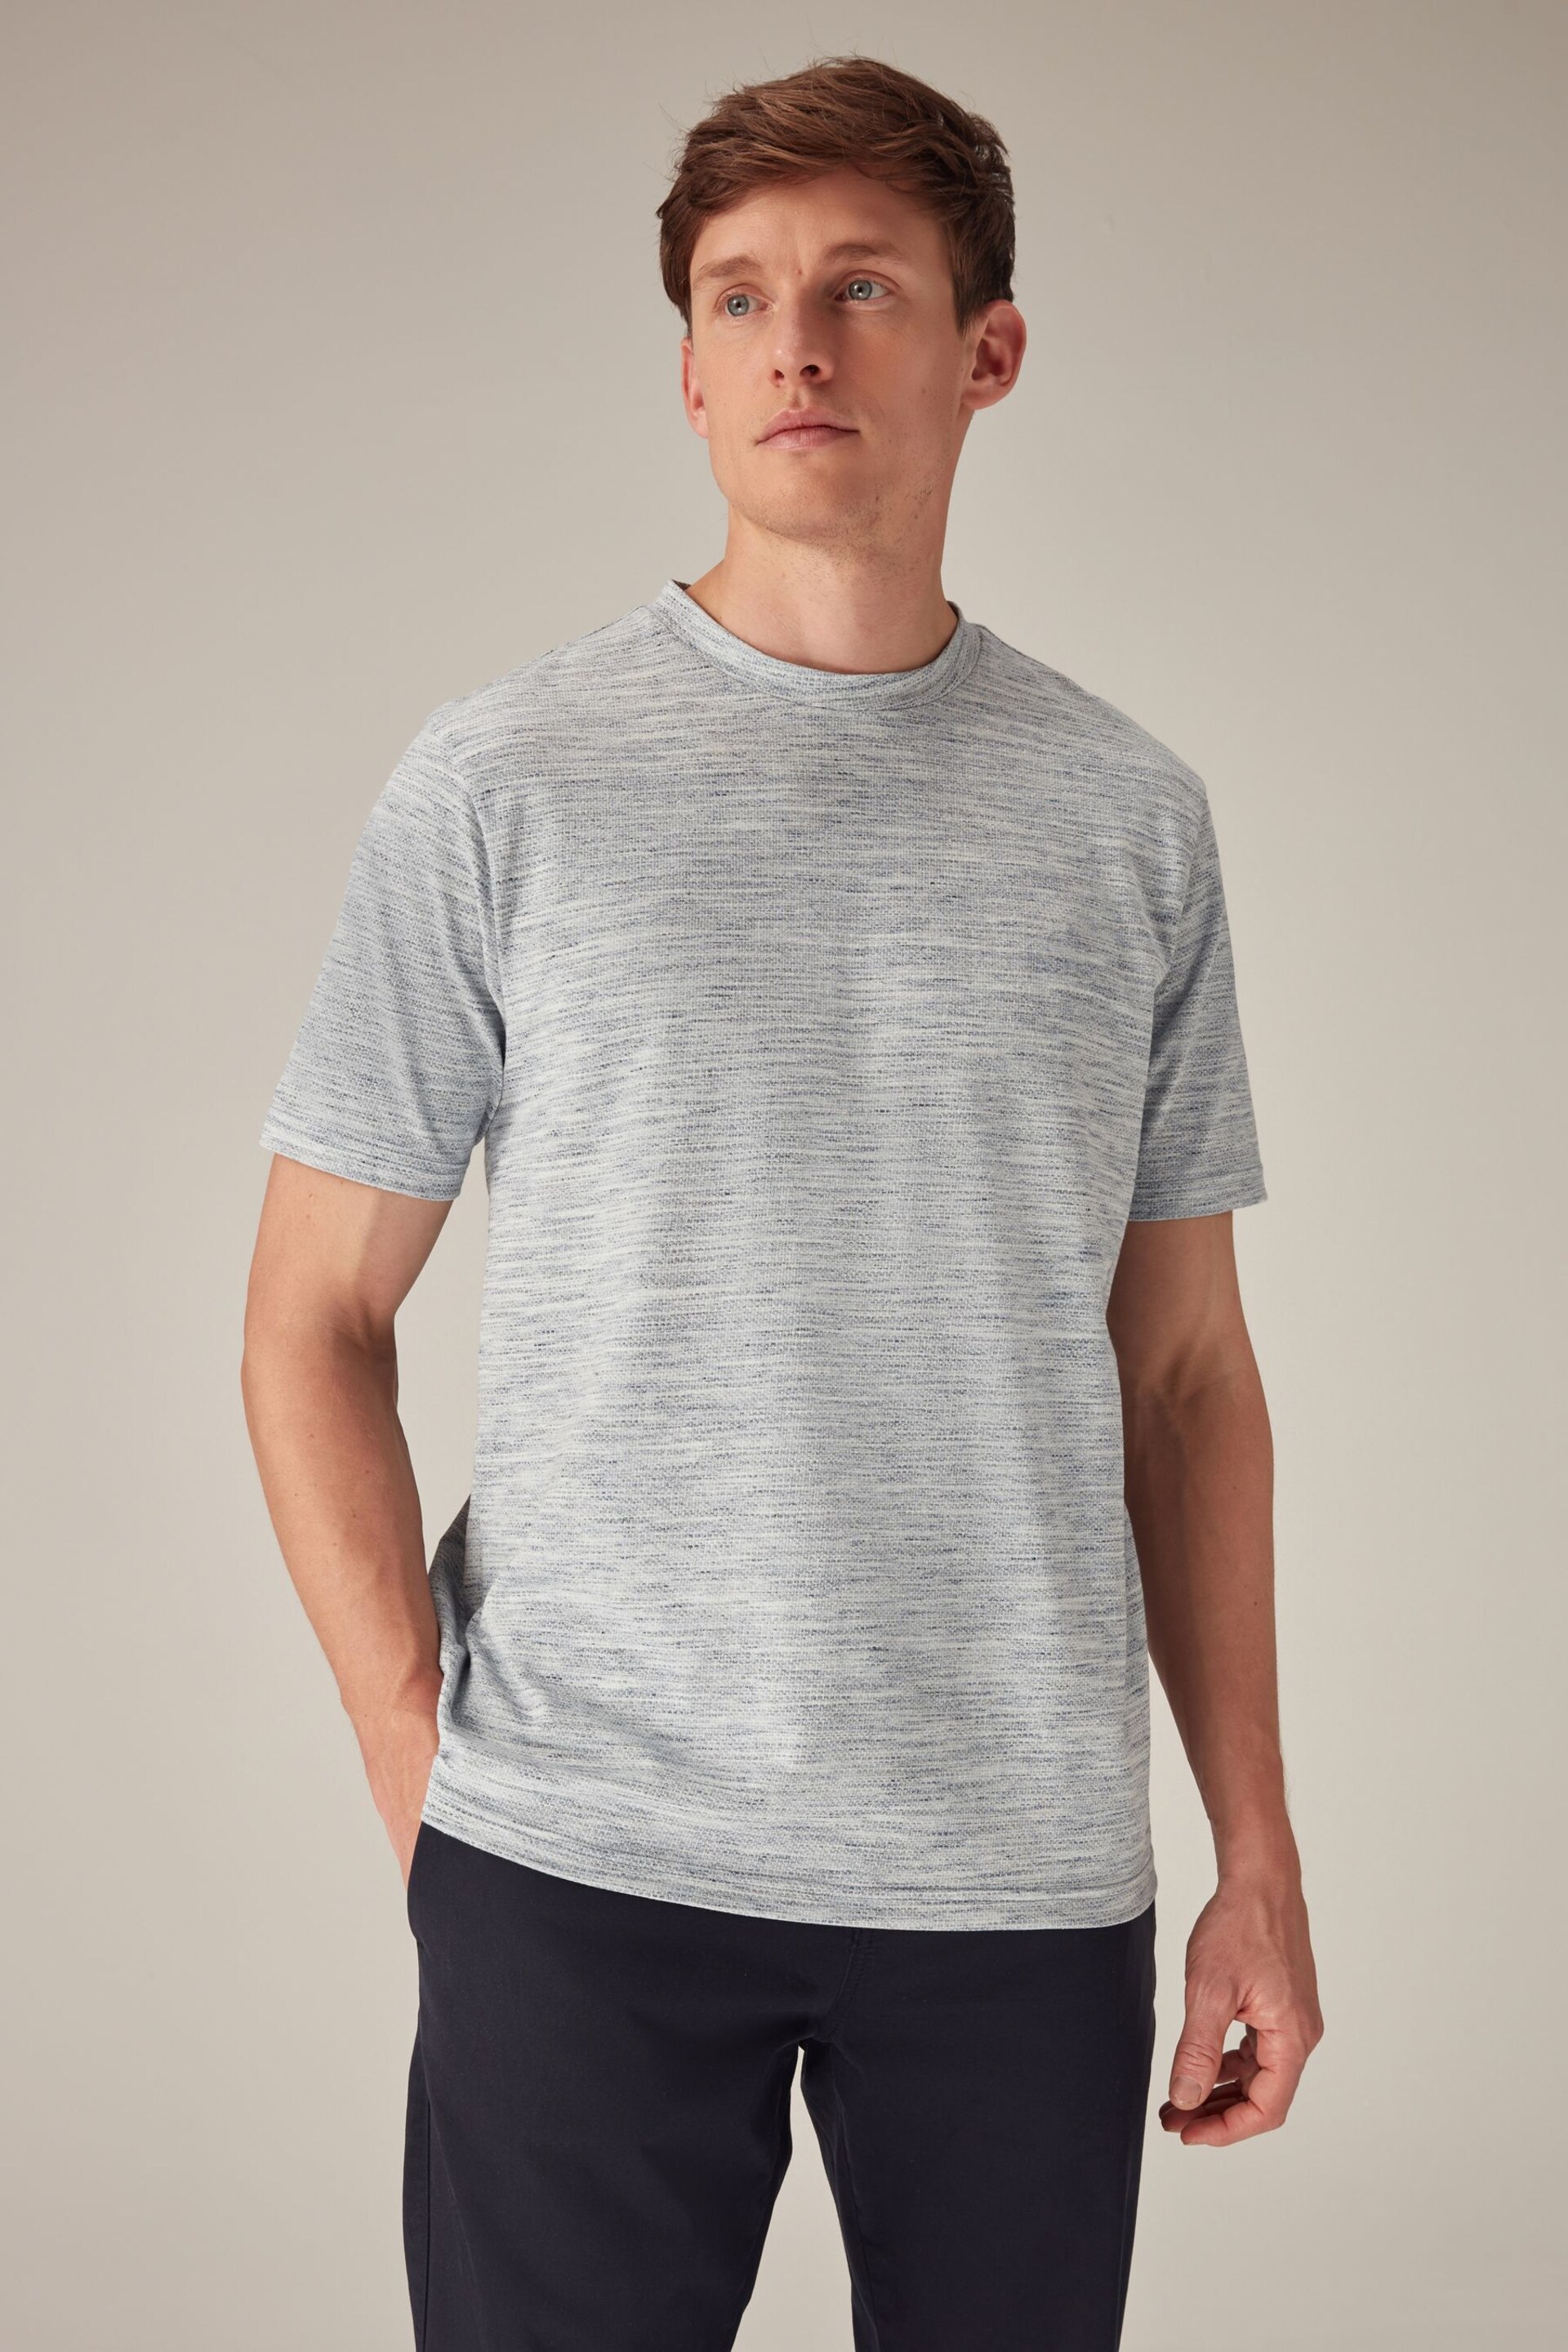 Blue Marl Textured T-Shirt - Image 2 of 7